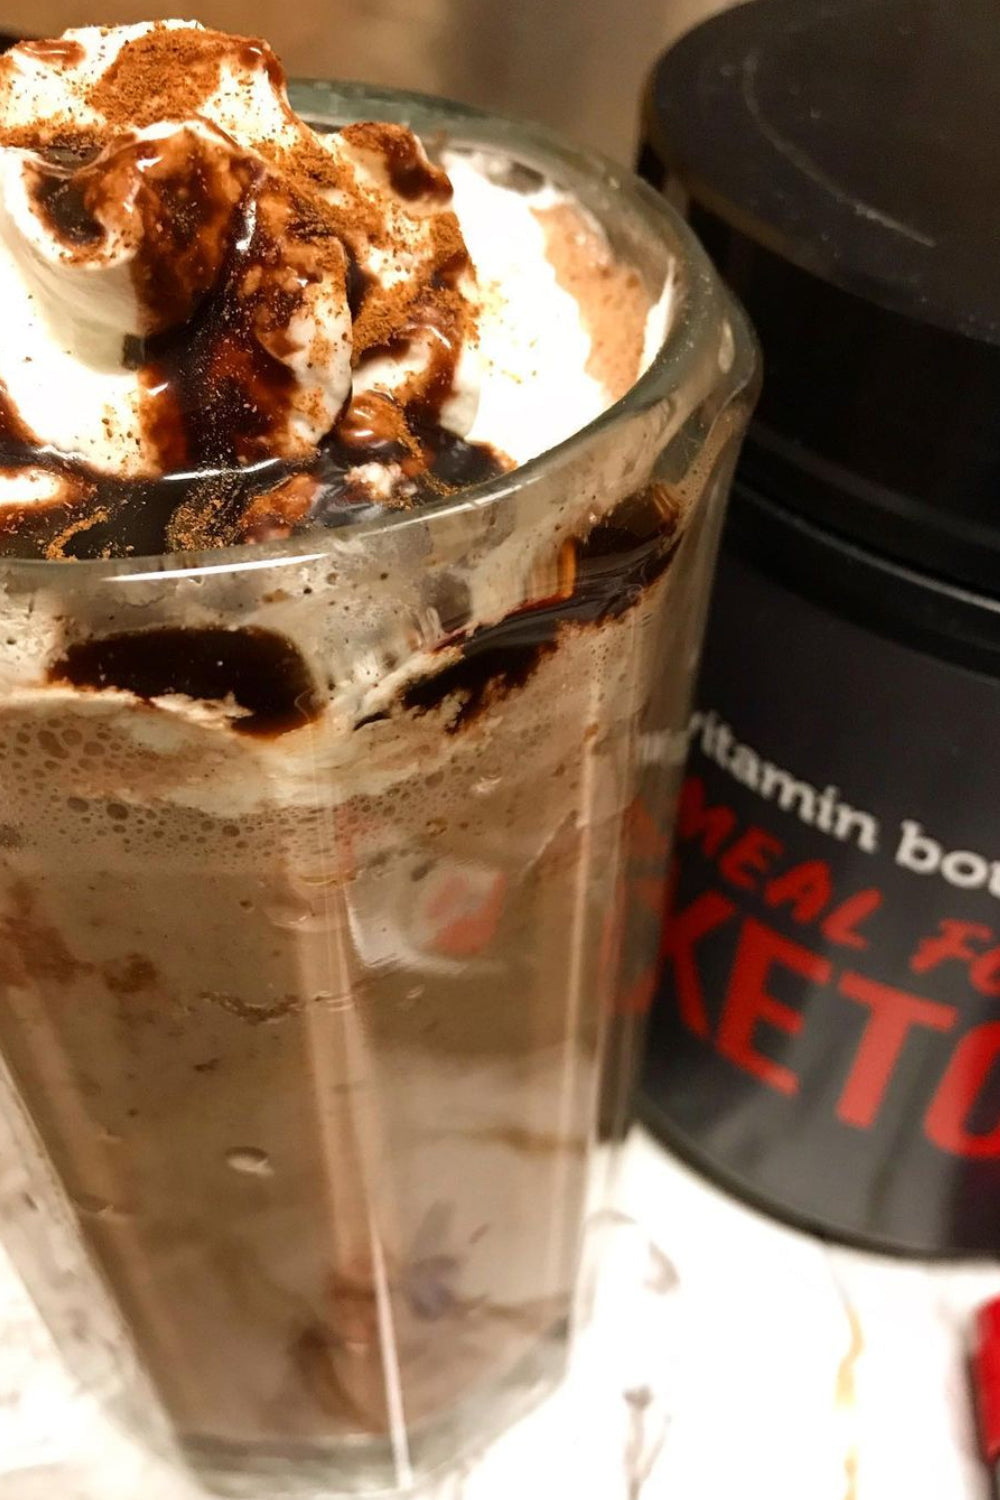 Chocolate milkshake made with Meal for Keto Protein Powder by Vitamin Bounty